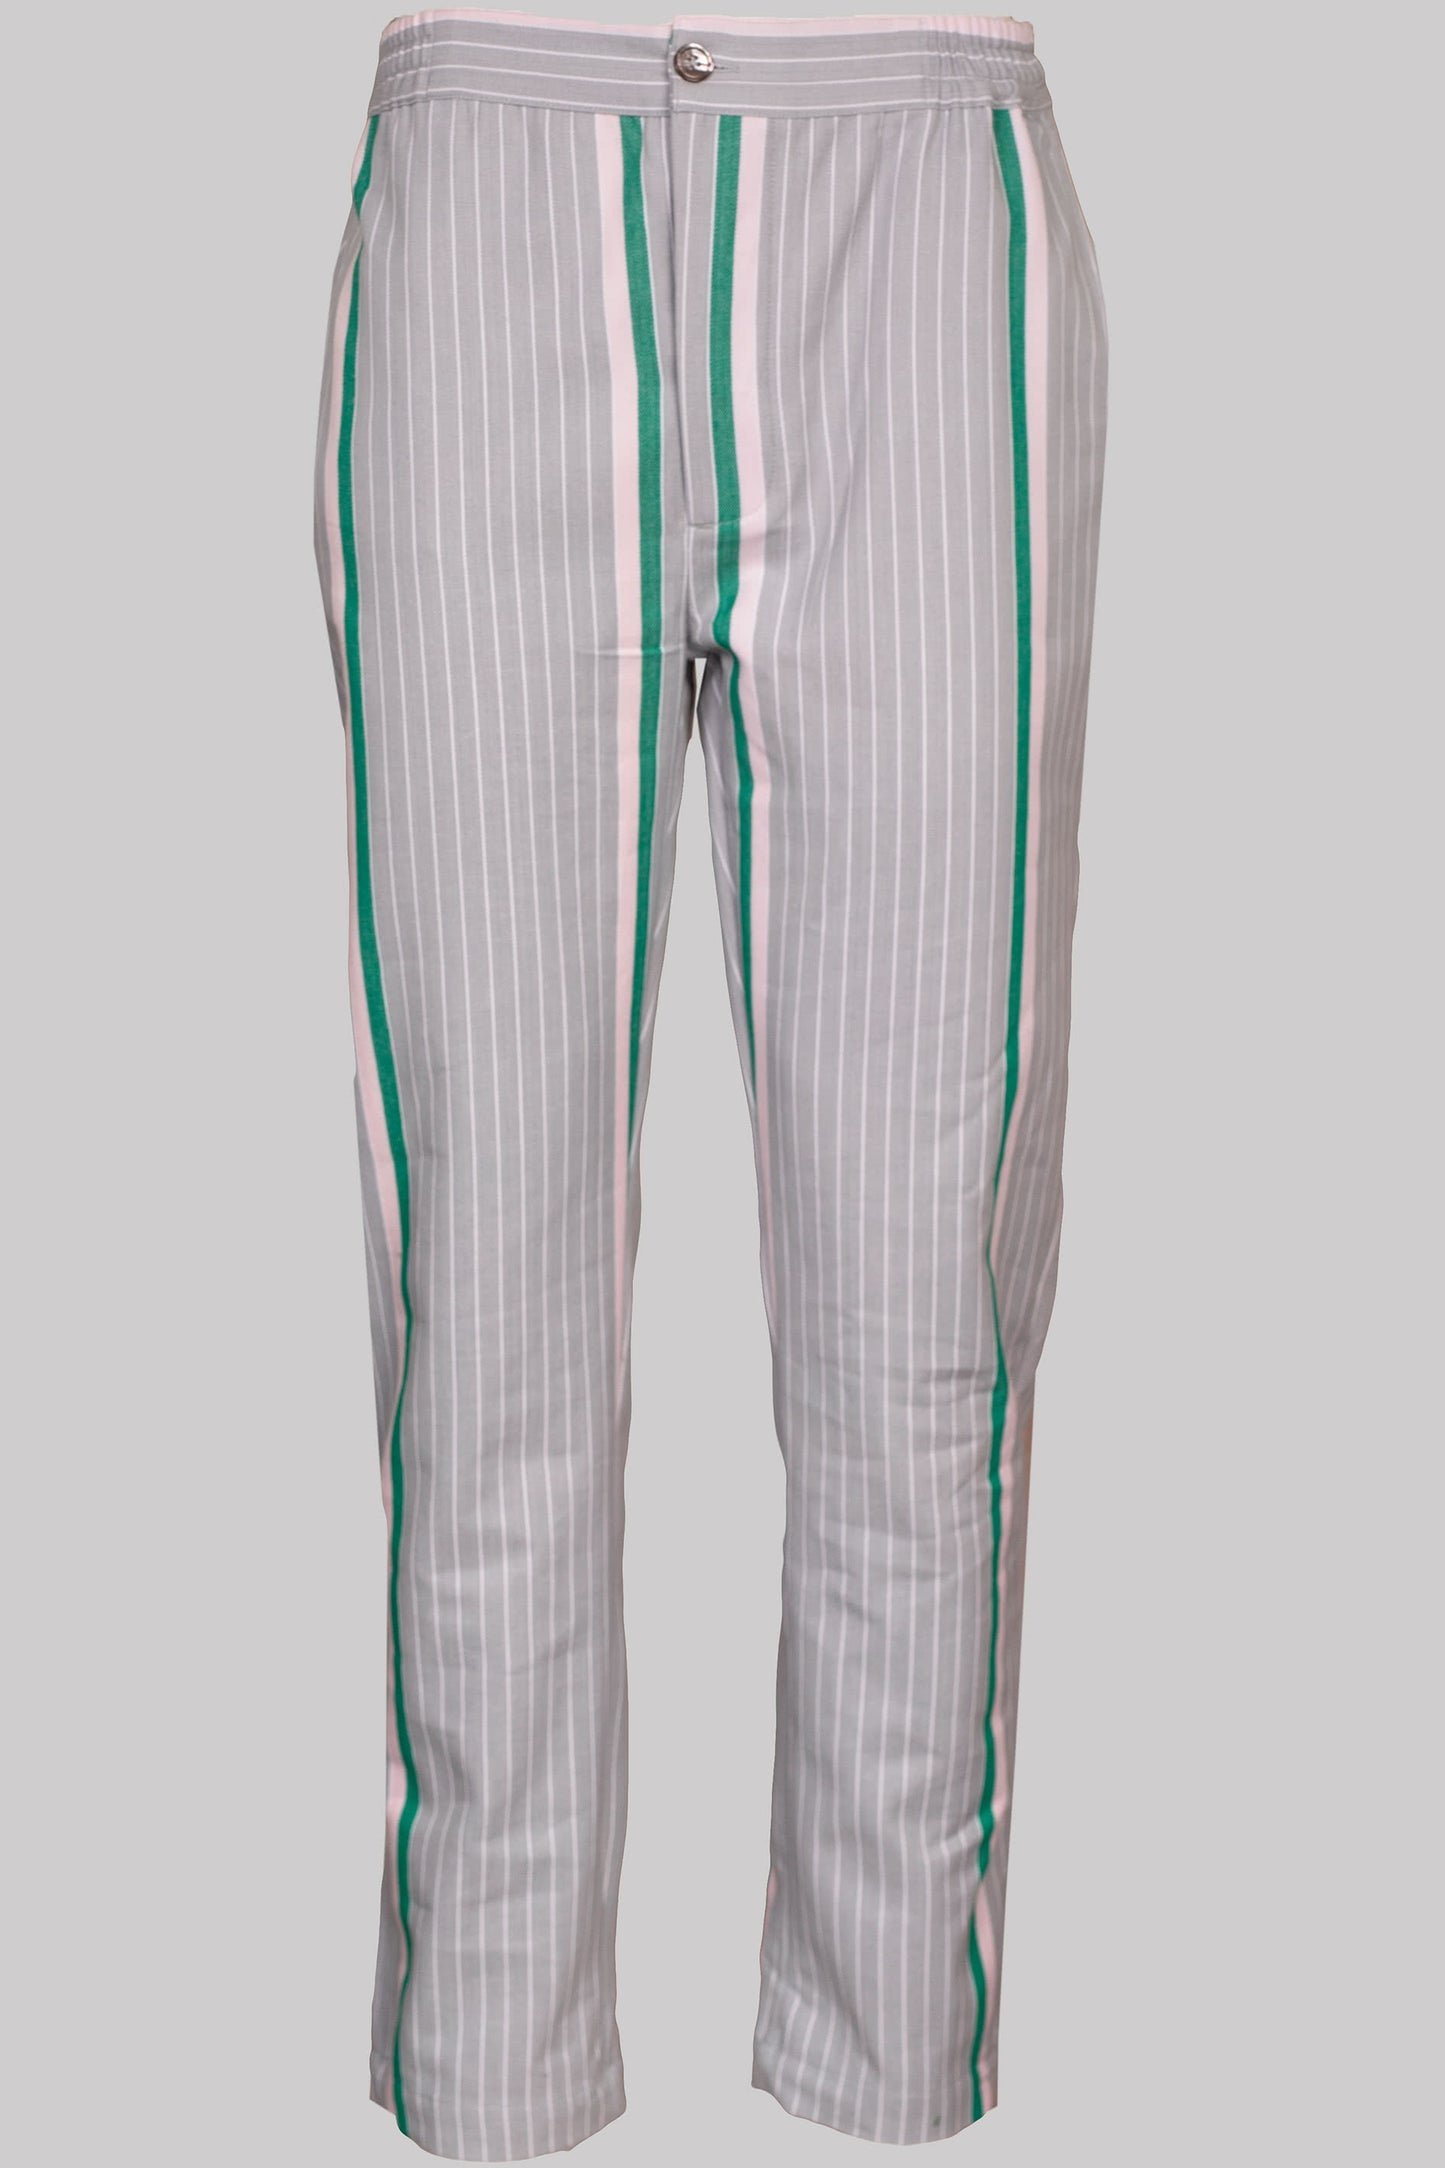 8799 BUTTON-TROUSERS GREY-Forestgreen-pink